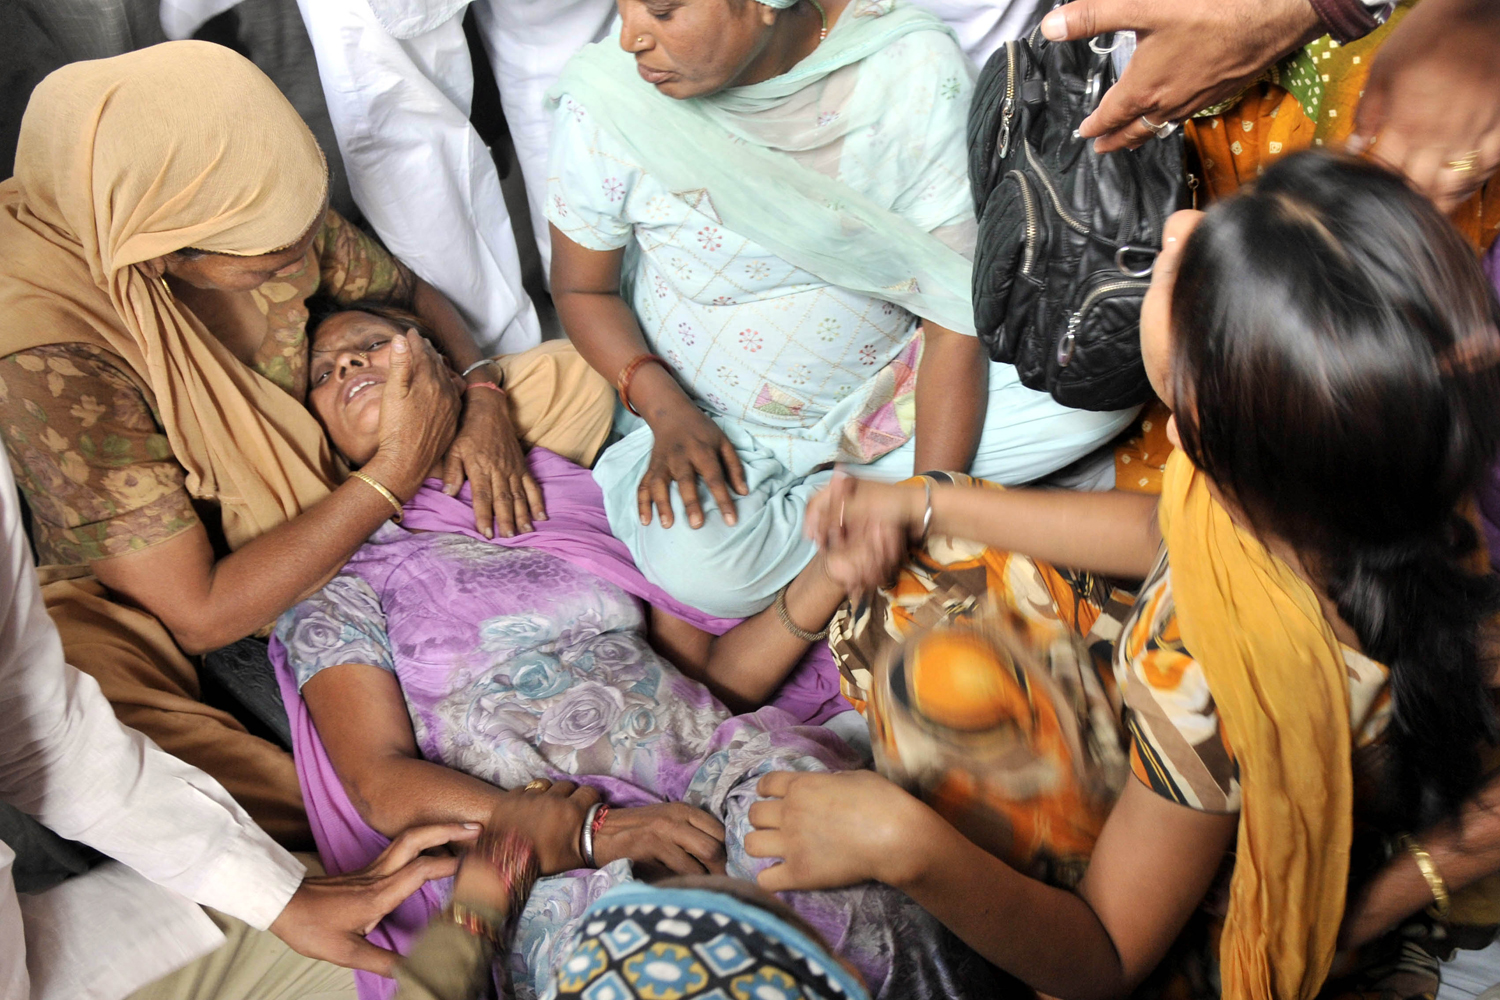 167932952 Sarabjit Singh's Family Mourns At His Native Home